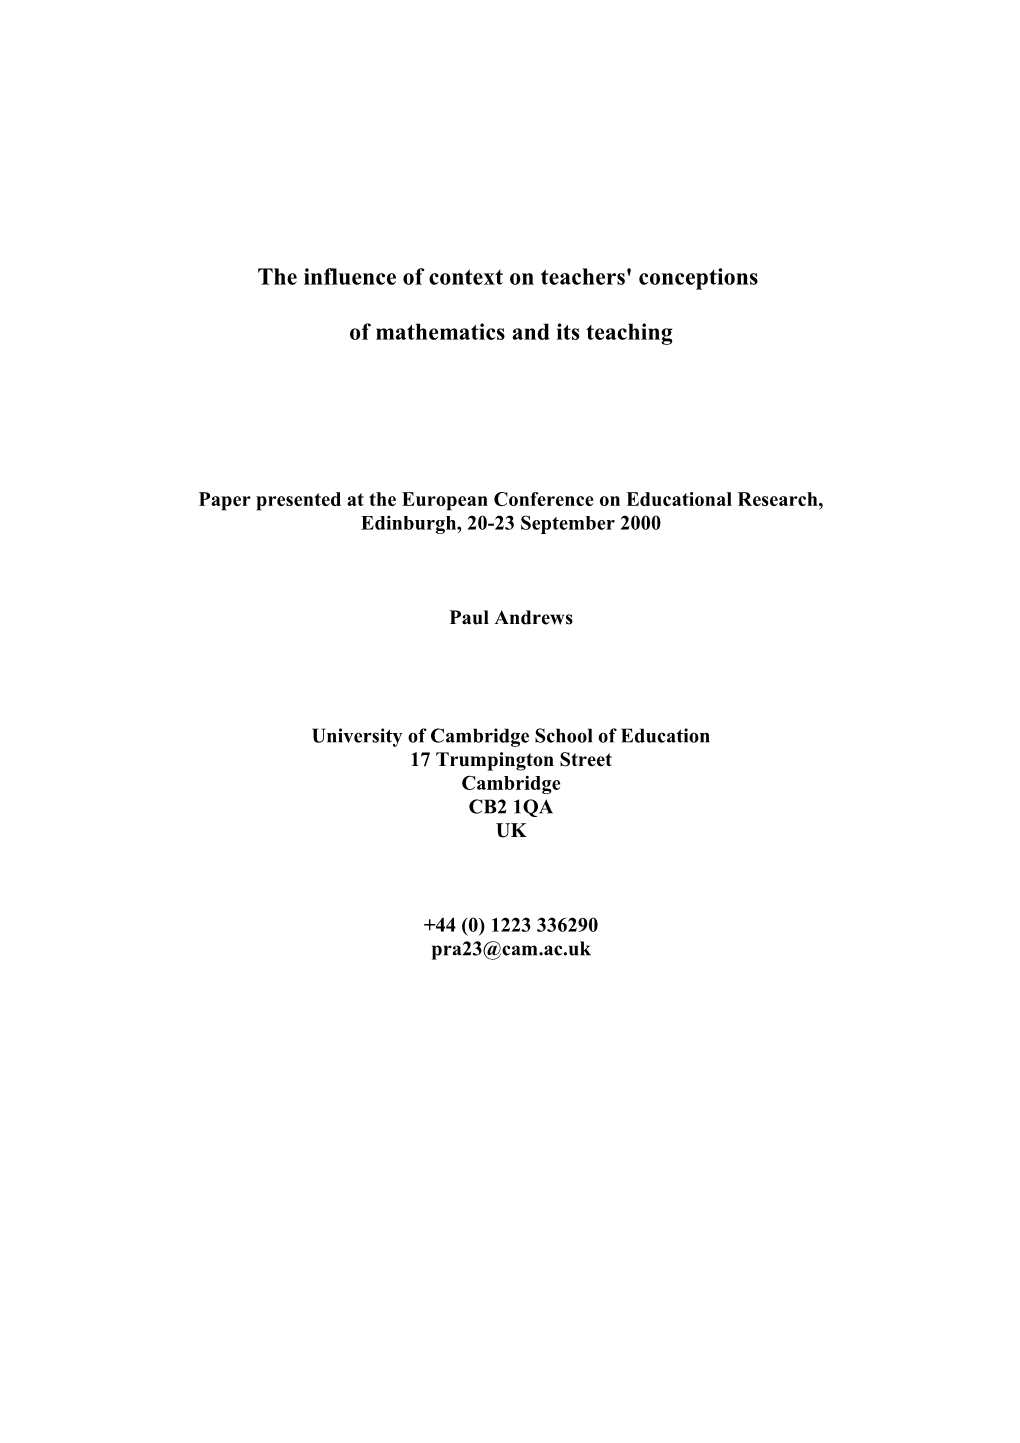 The Influence of Context on Teachers' Conceptions